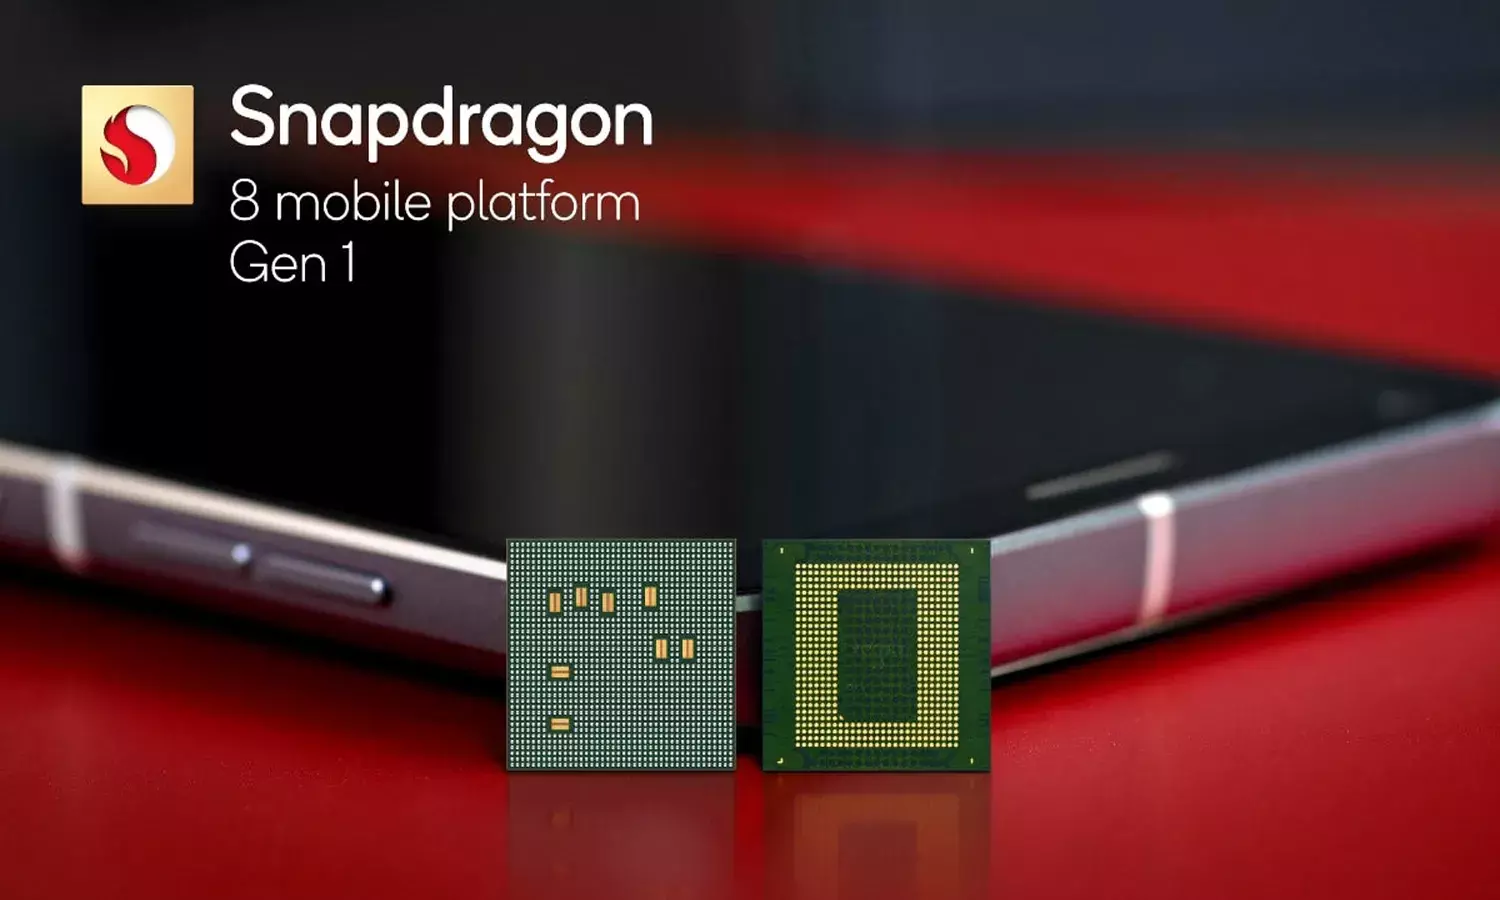 Complete Details of the Newly Launched Snapdragon 8 Gen 1 Processor